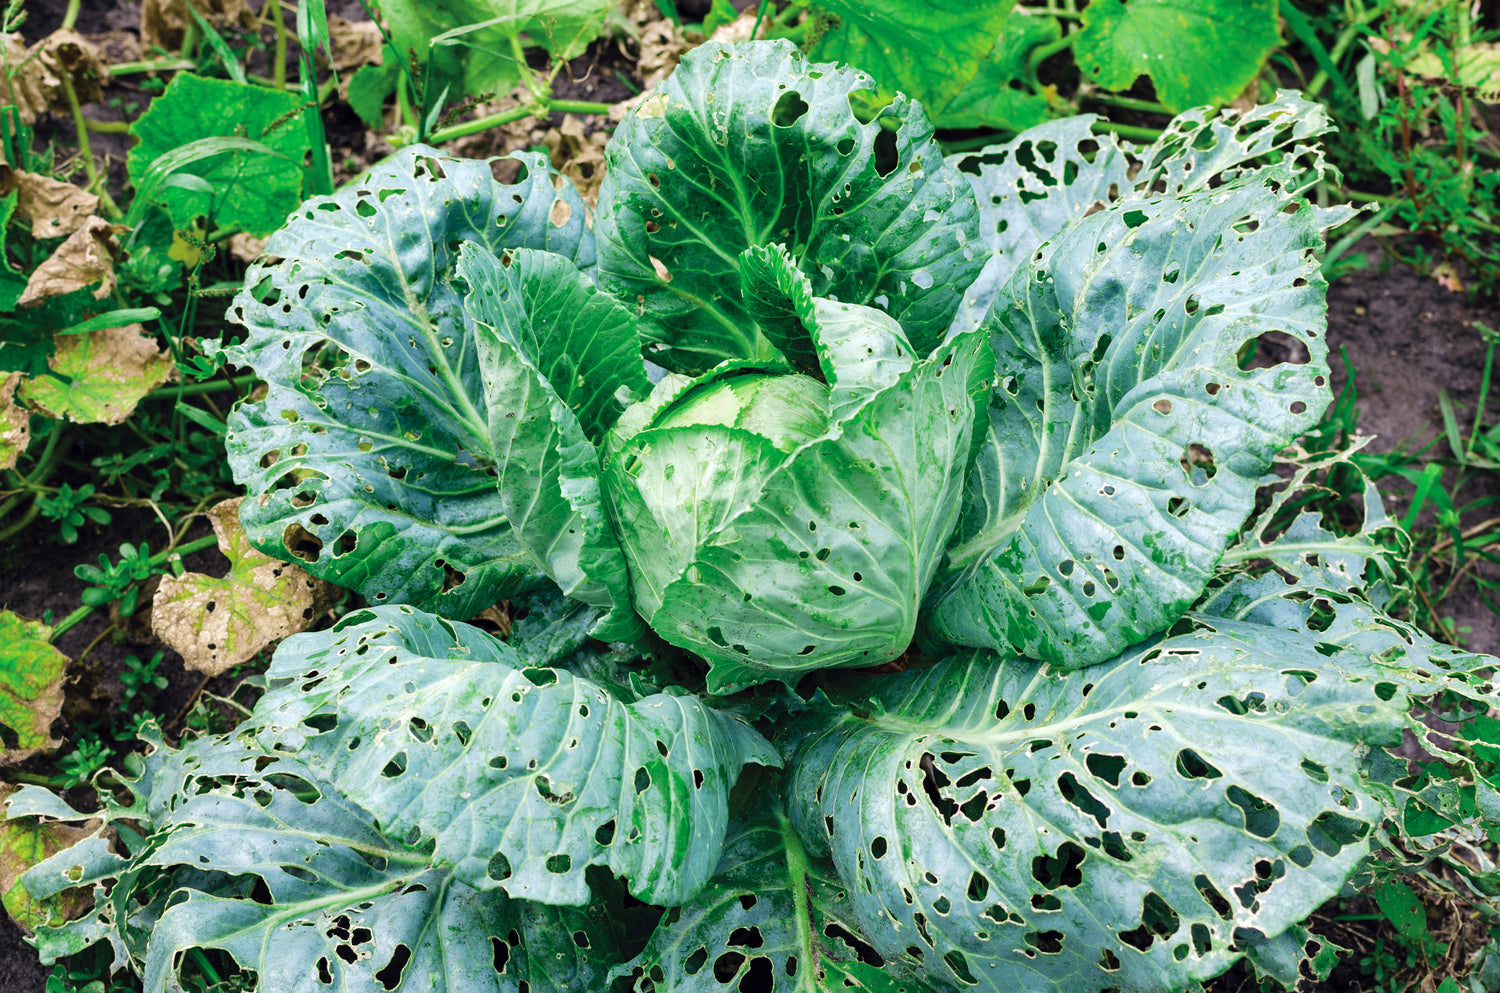 mature cabbage plant with hundreds of small holes in it caused by pests